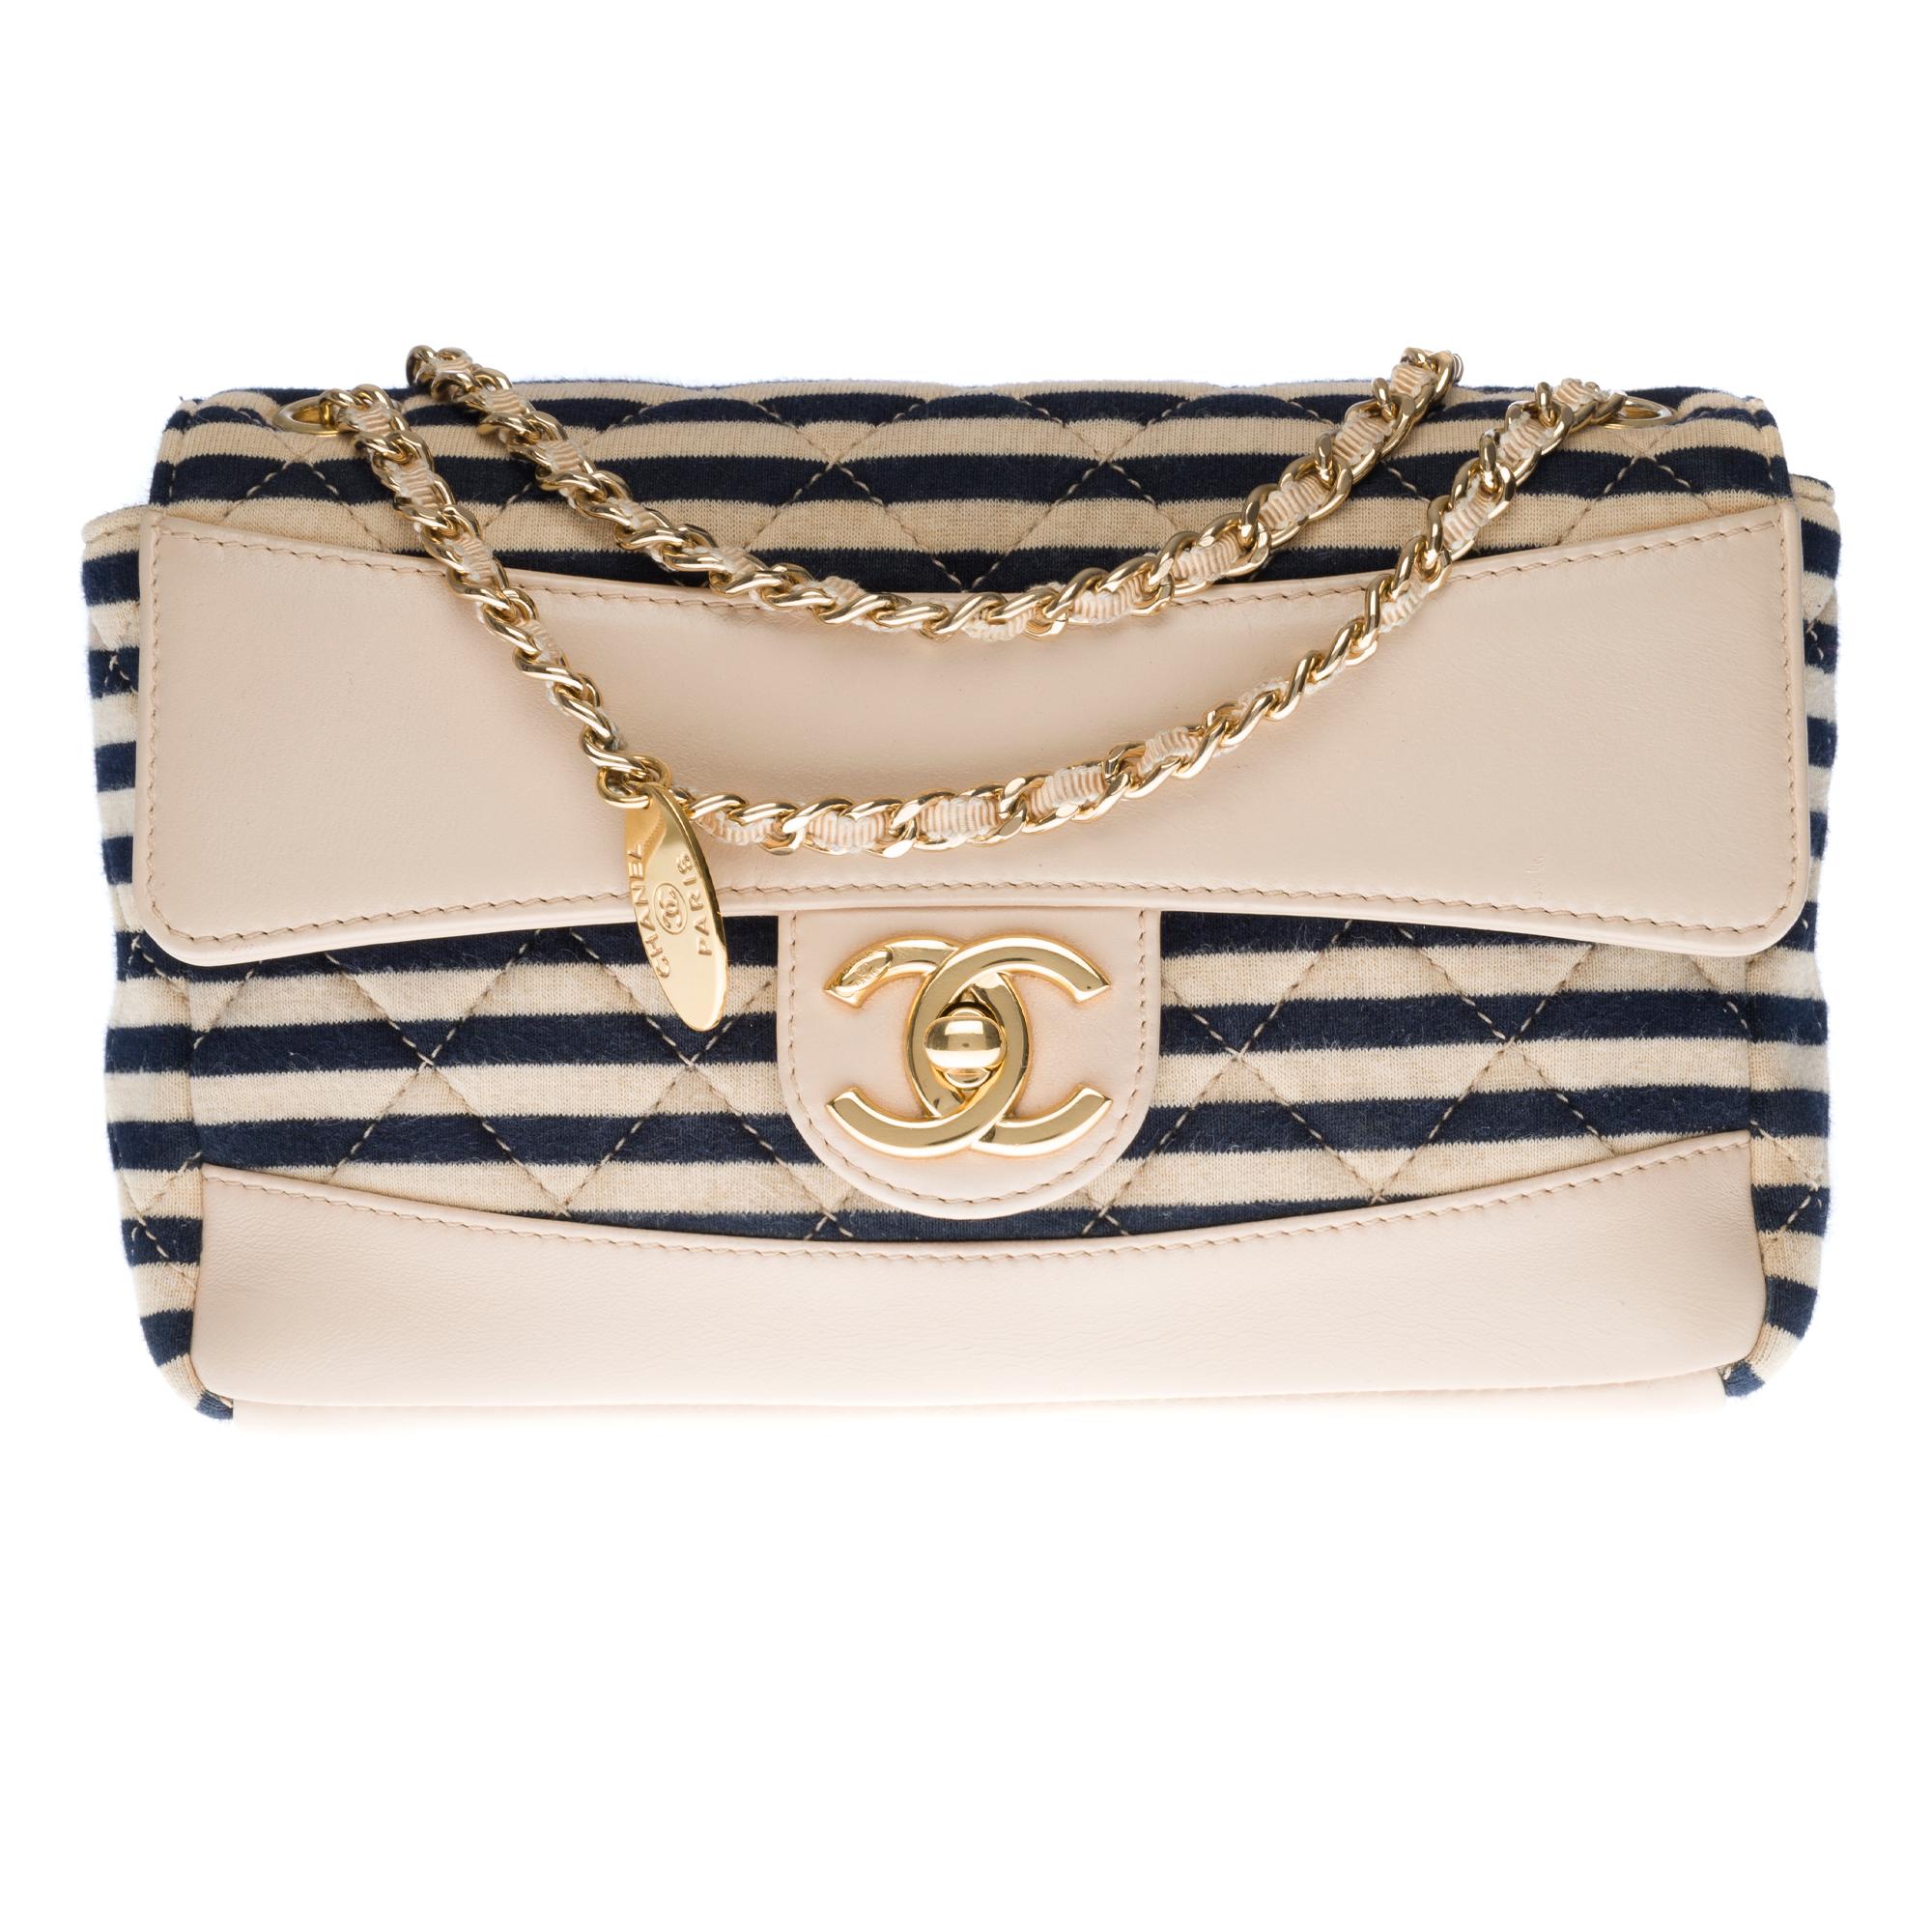 Chanel New Mini Timeless Shoulder bag in beige leather & blue navy cotton, GHW